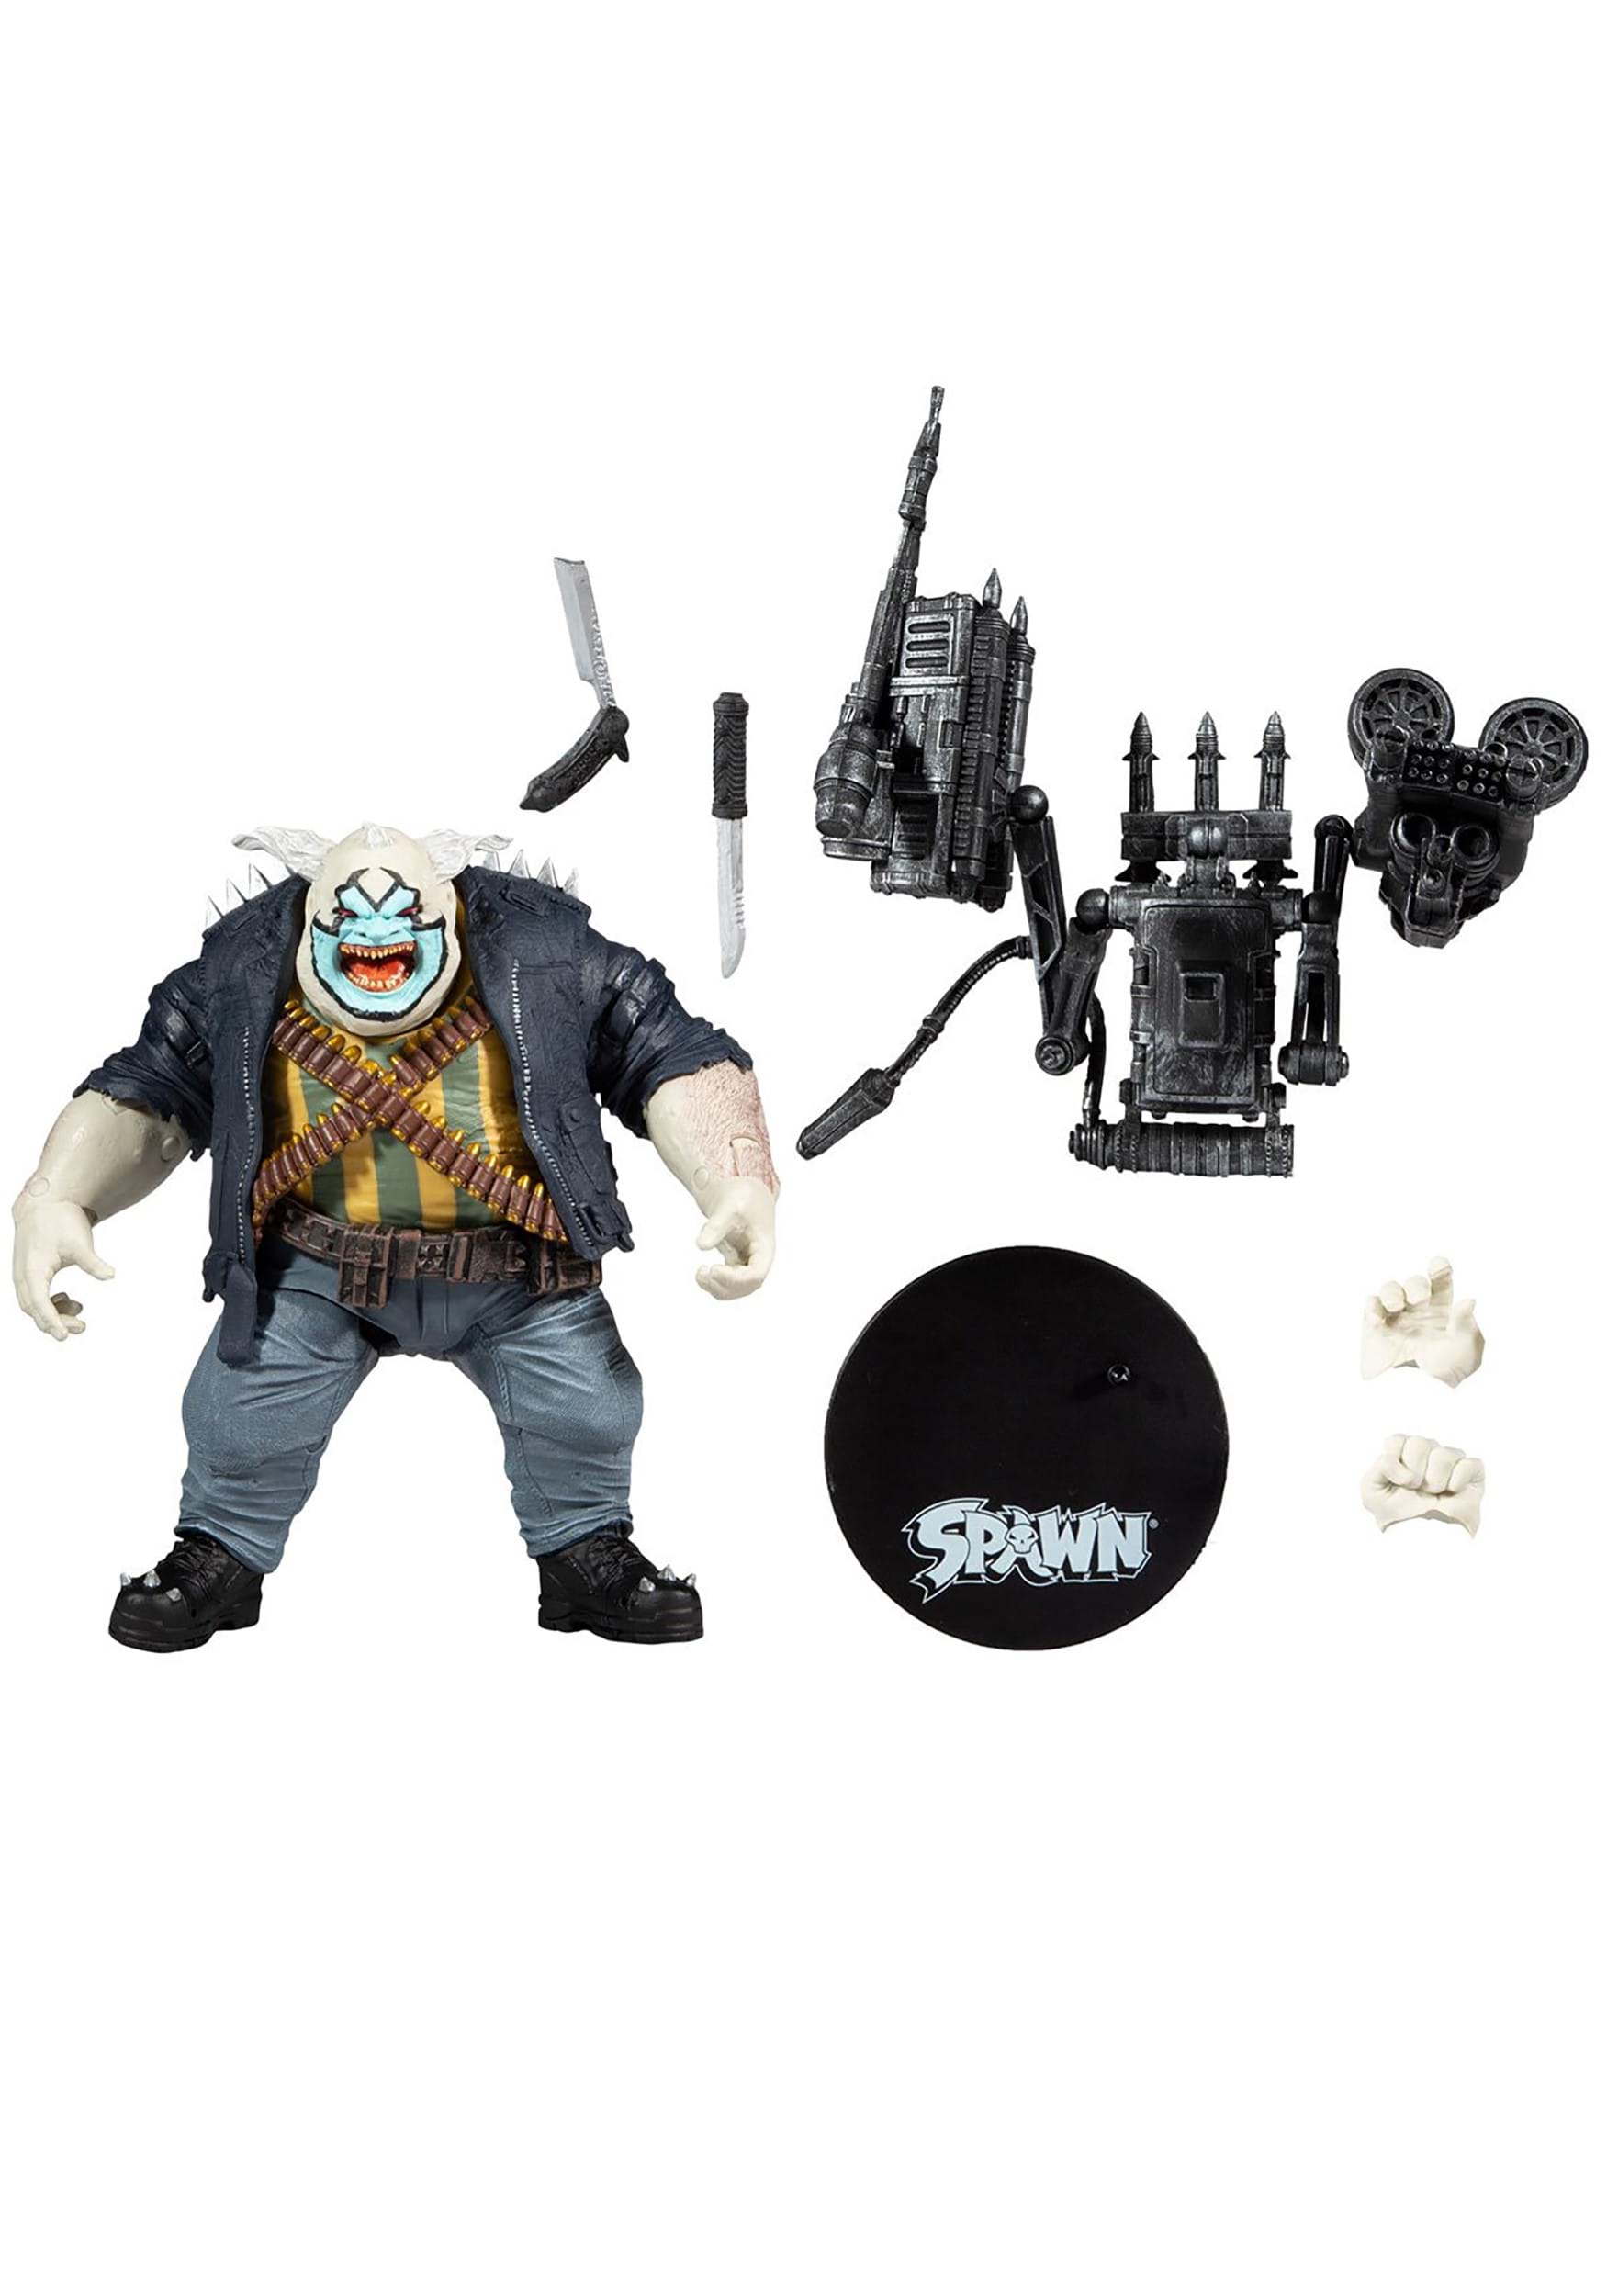 The Clown Spawn Deluxe Action Figure Set